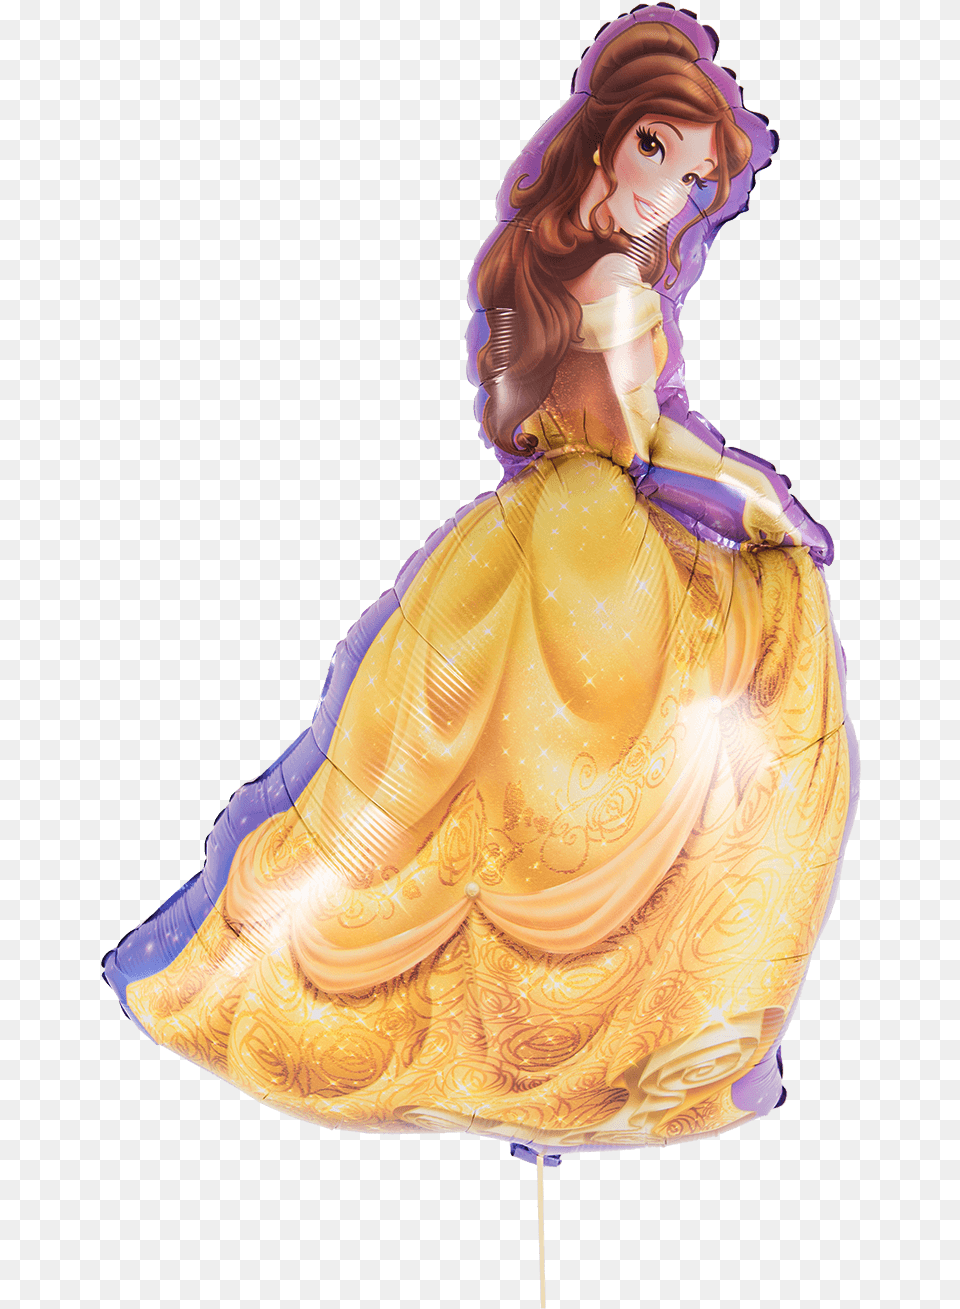 Disney Princess Belle Supershape Balloon Beauty And The Beast, Clothing, Dress, Adult, Wedding Png